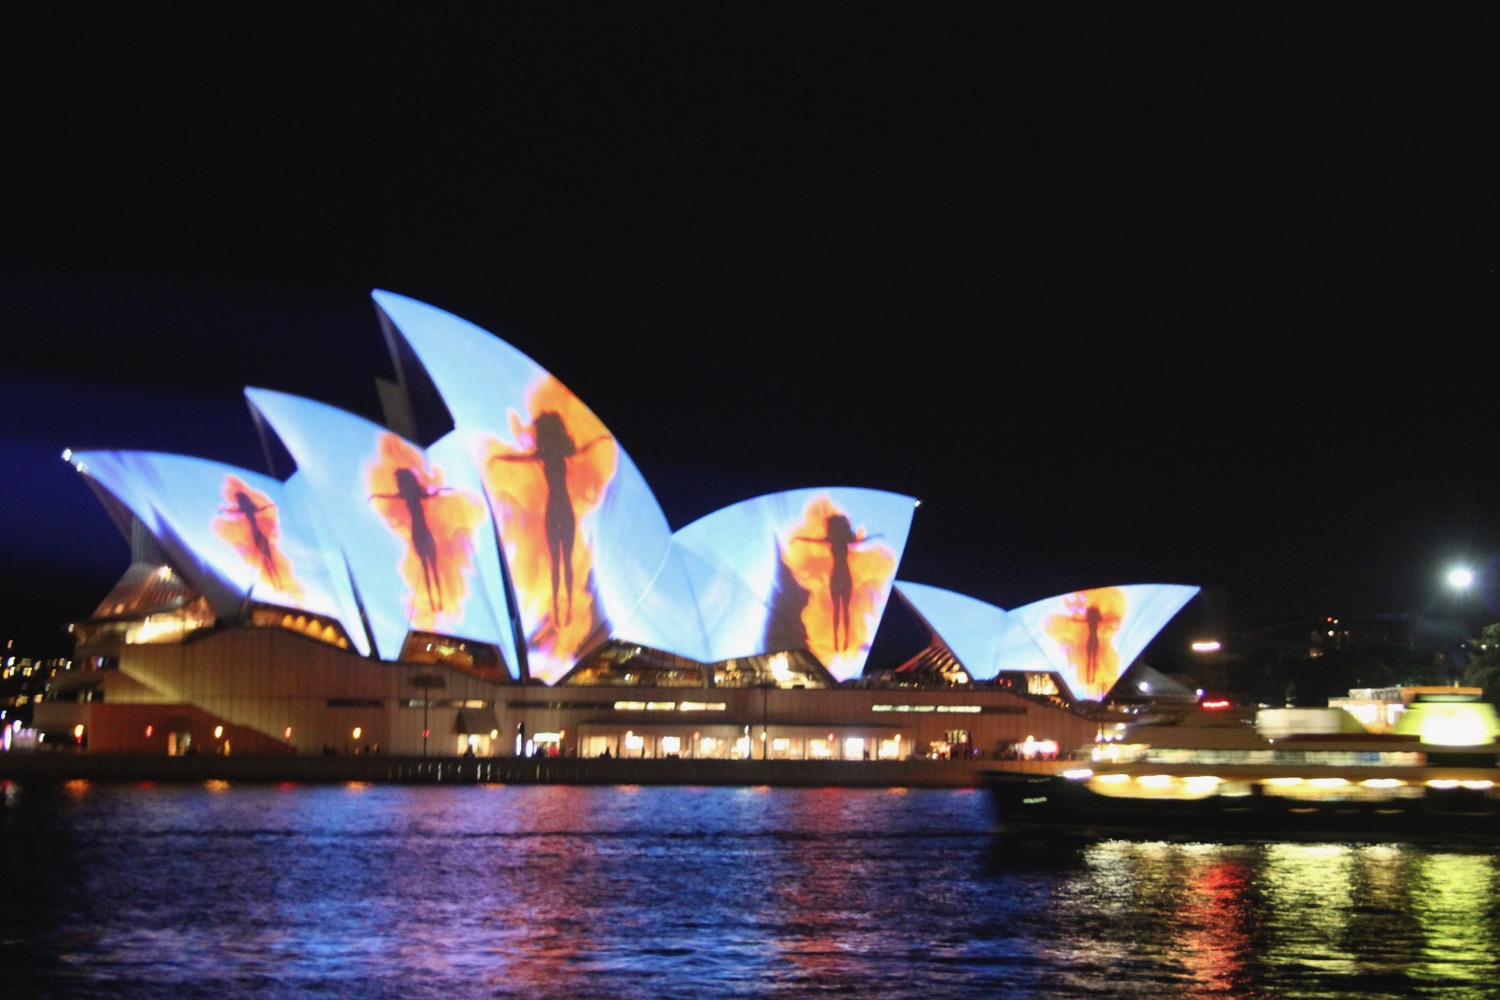 Sydney Opera House with a large structure with a group of people on it